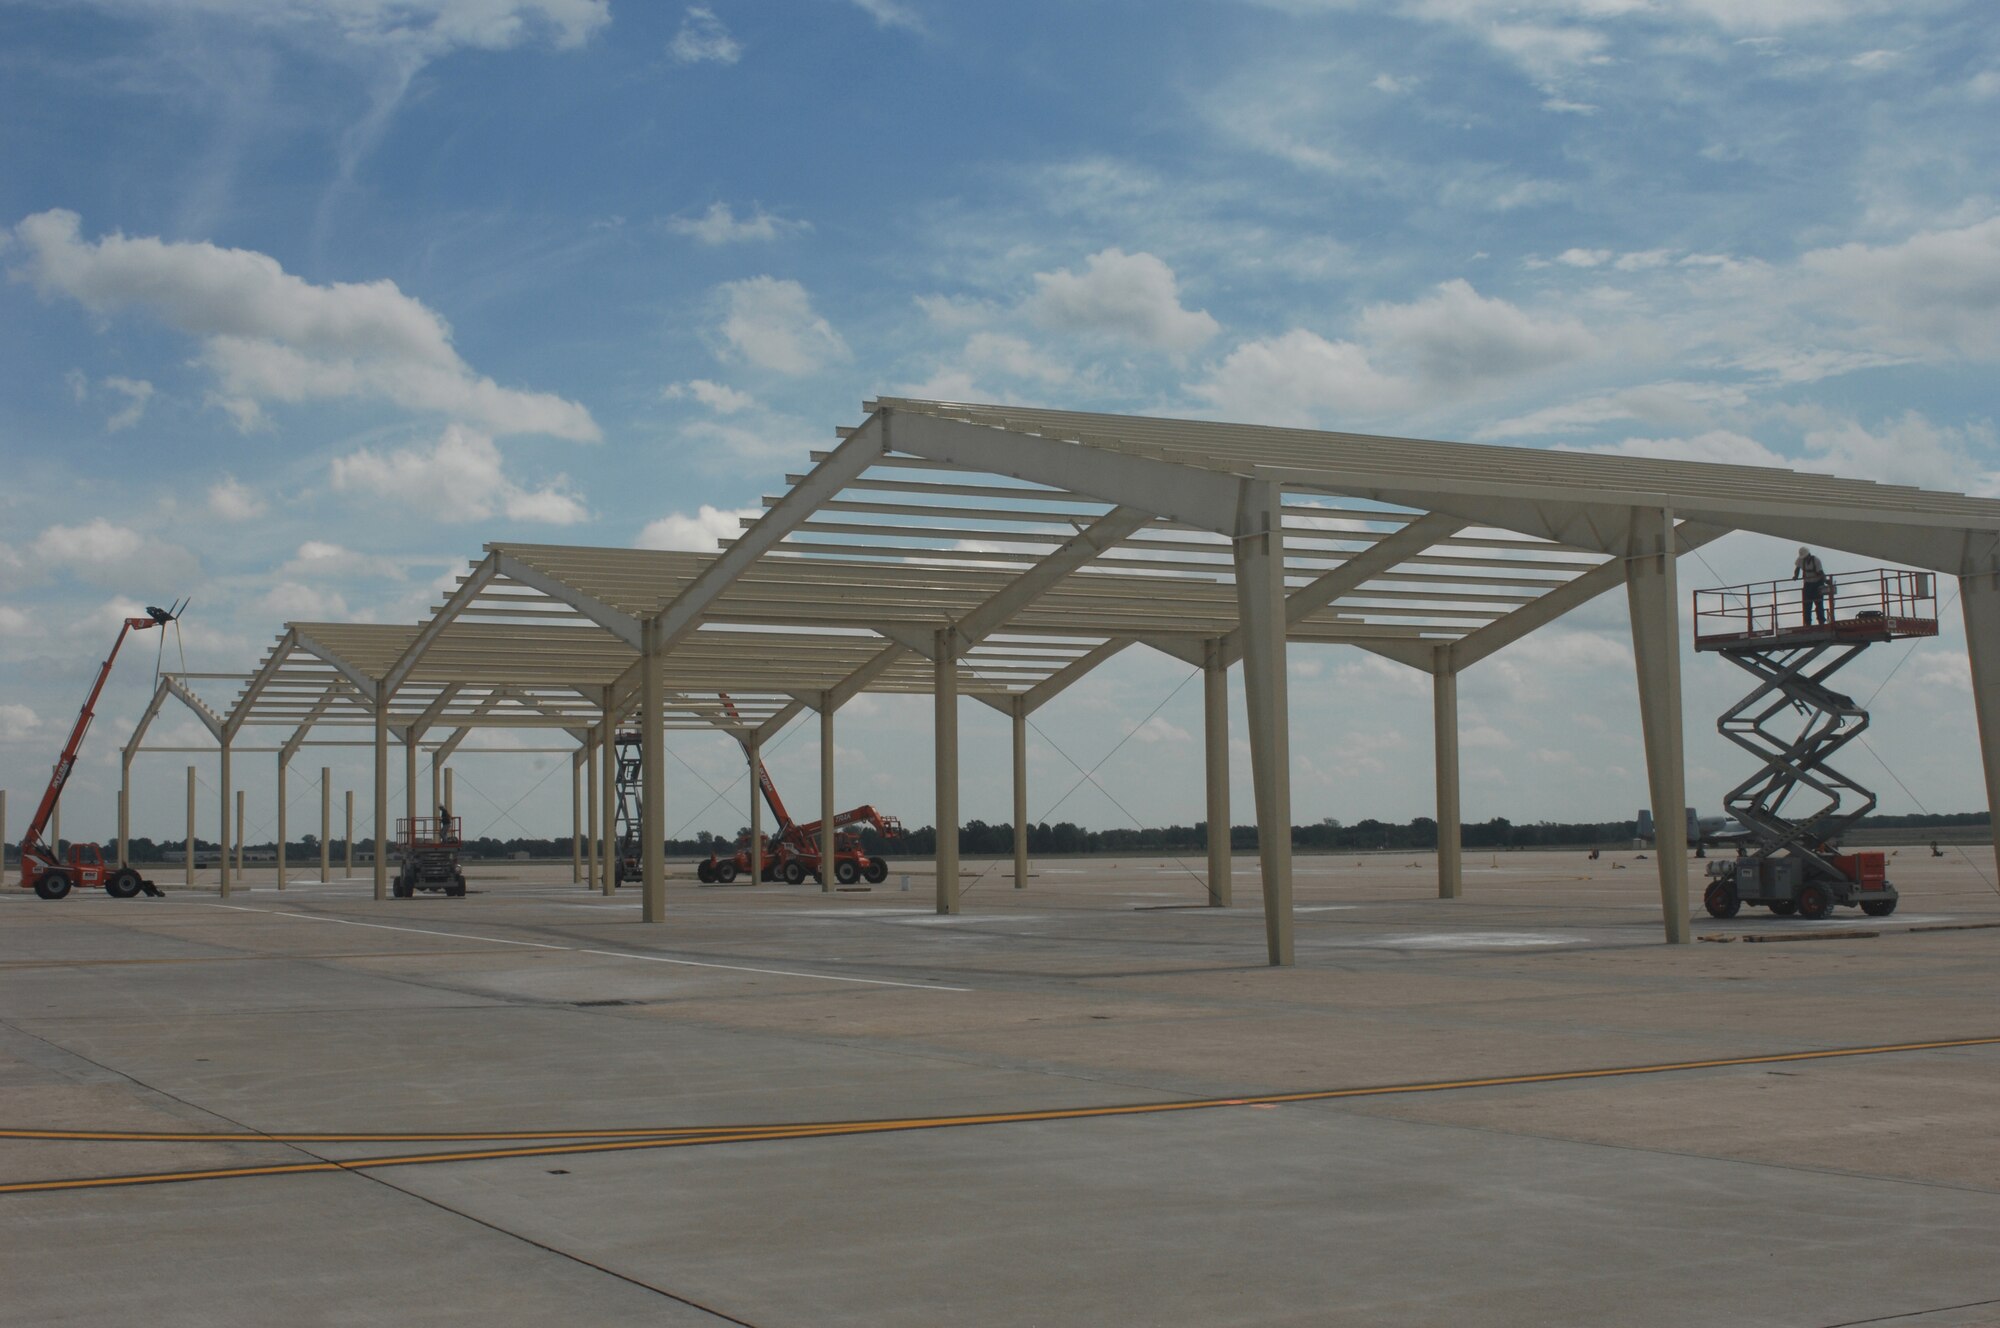 WHITEMAN AIR FORCE BASE, Mo., -- Shelters are being constructed for the 442nd Fighter Wing A-10 s between the A-10 maintenance hangers and the 509th Bomb Wing B-2 docks. Due to the 2005 realignment, whiteman had an increase of aircraft it did not have enough hanger space for. The shelters will be used for maintenance on the A-10’s during increment weather. (U.S. Air Force Photo/Tech Sgt. Samuel Park)